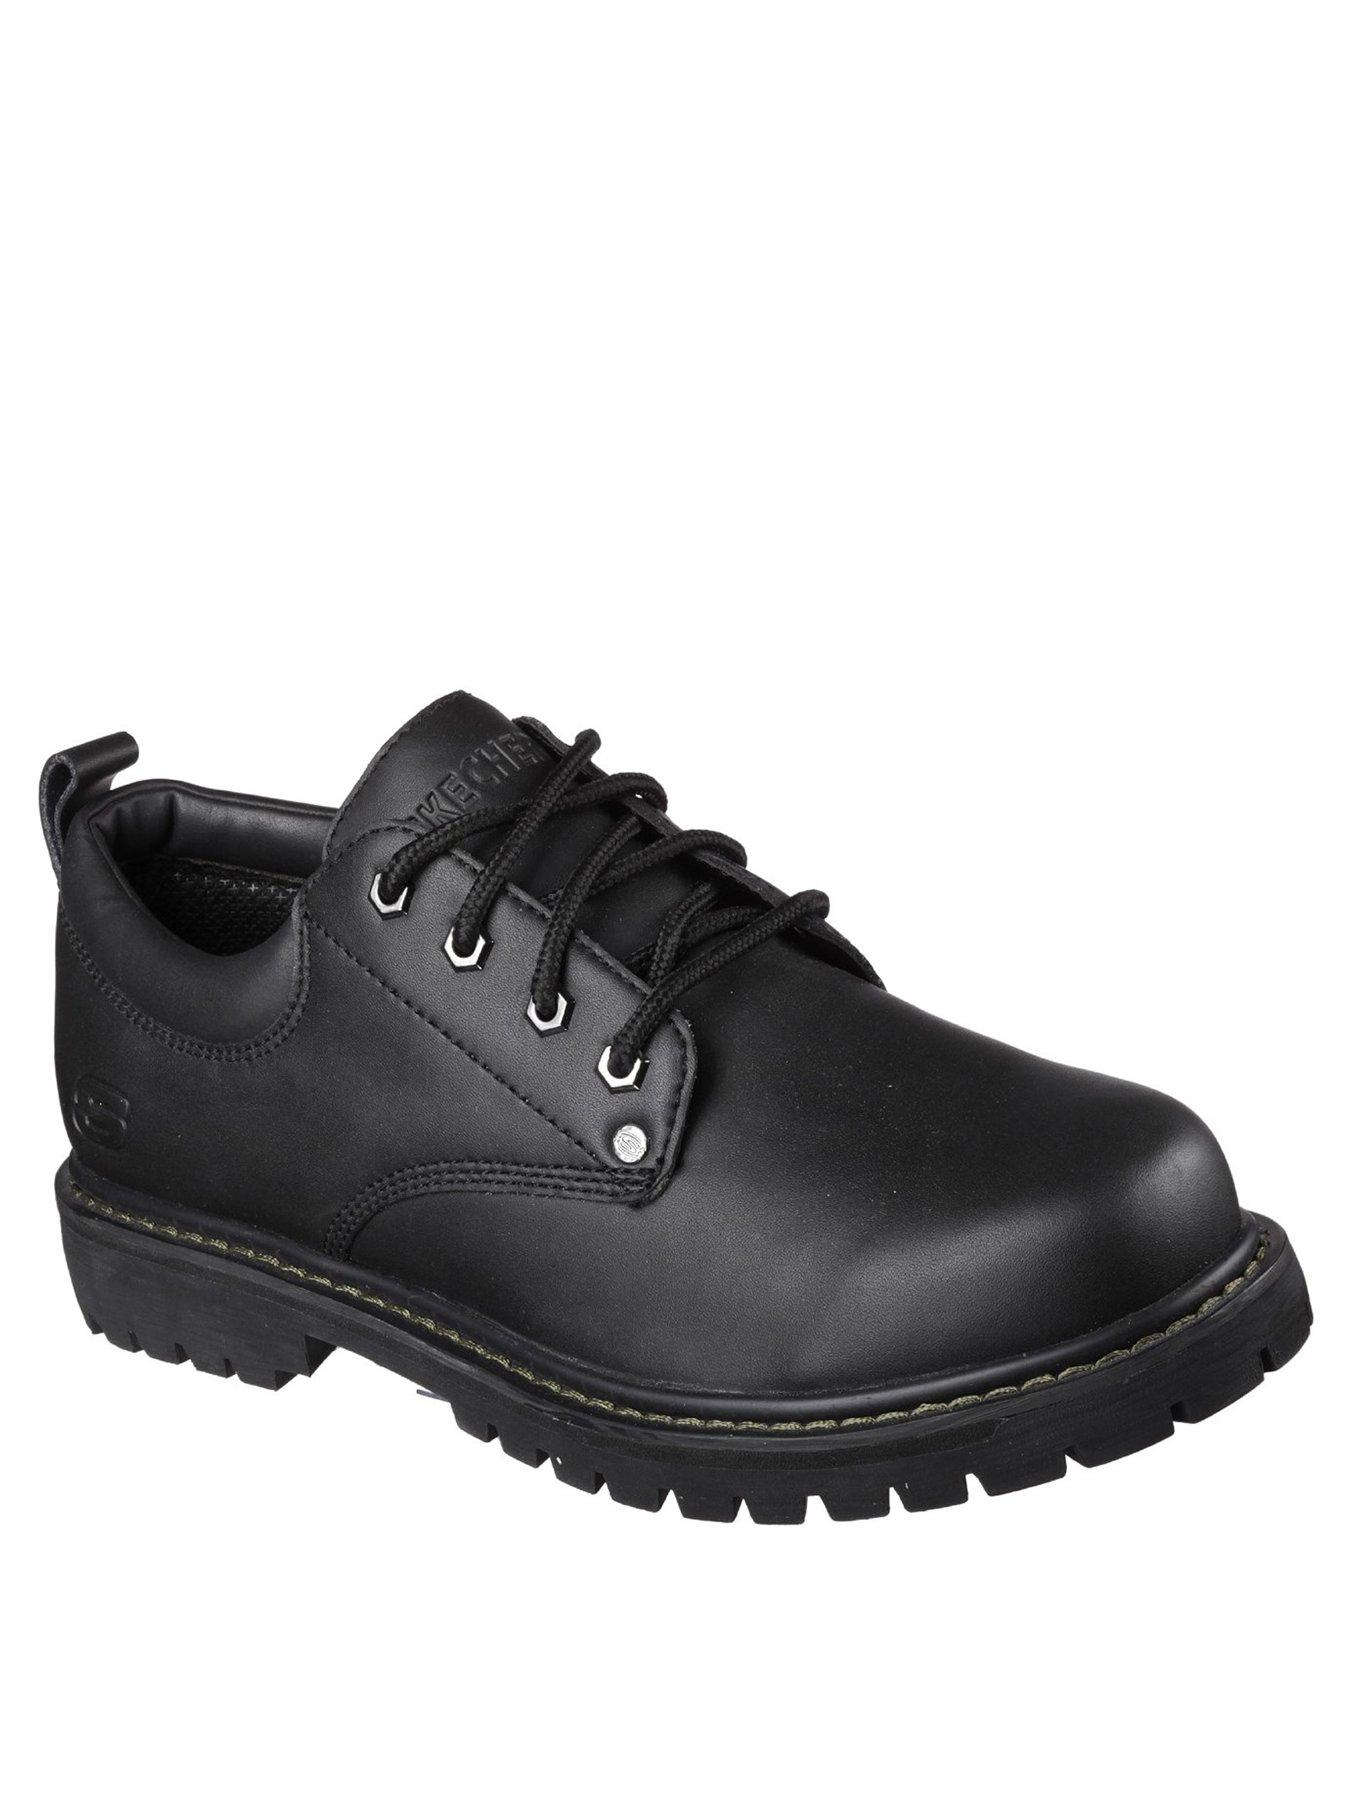 Skechers Tom Cats Utility Leather Shoes 